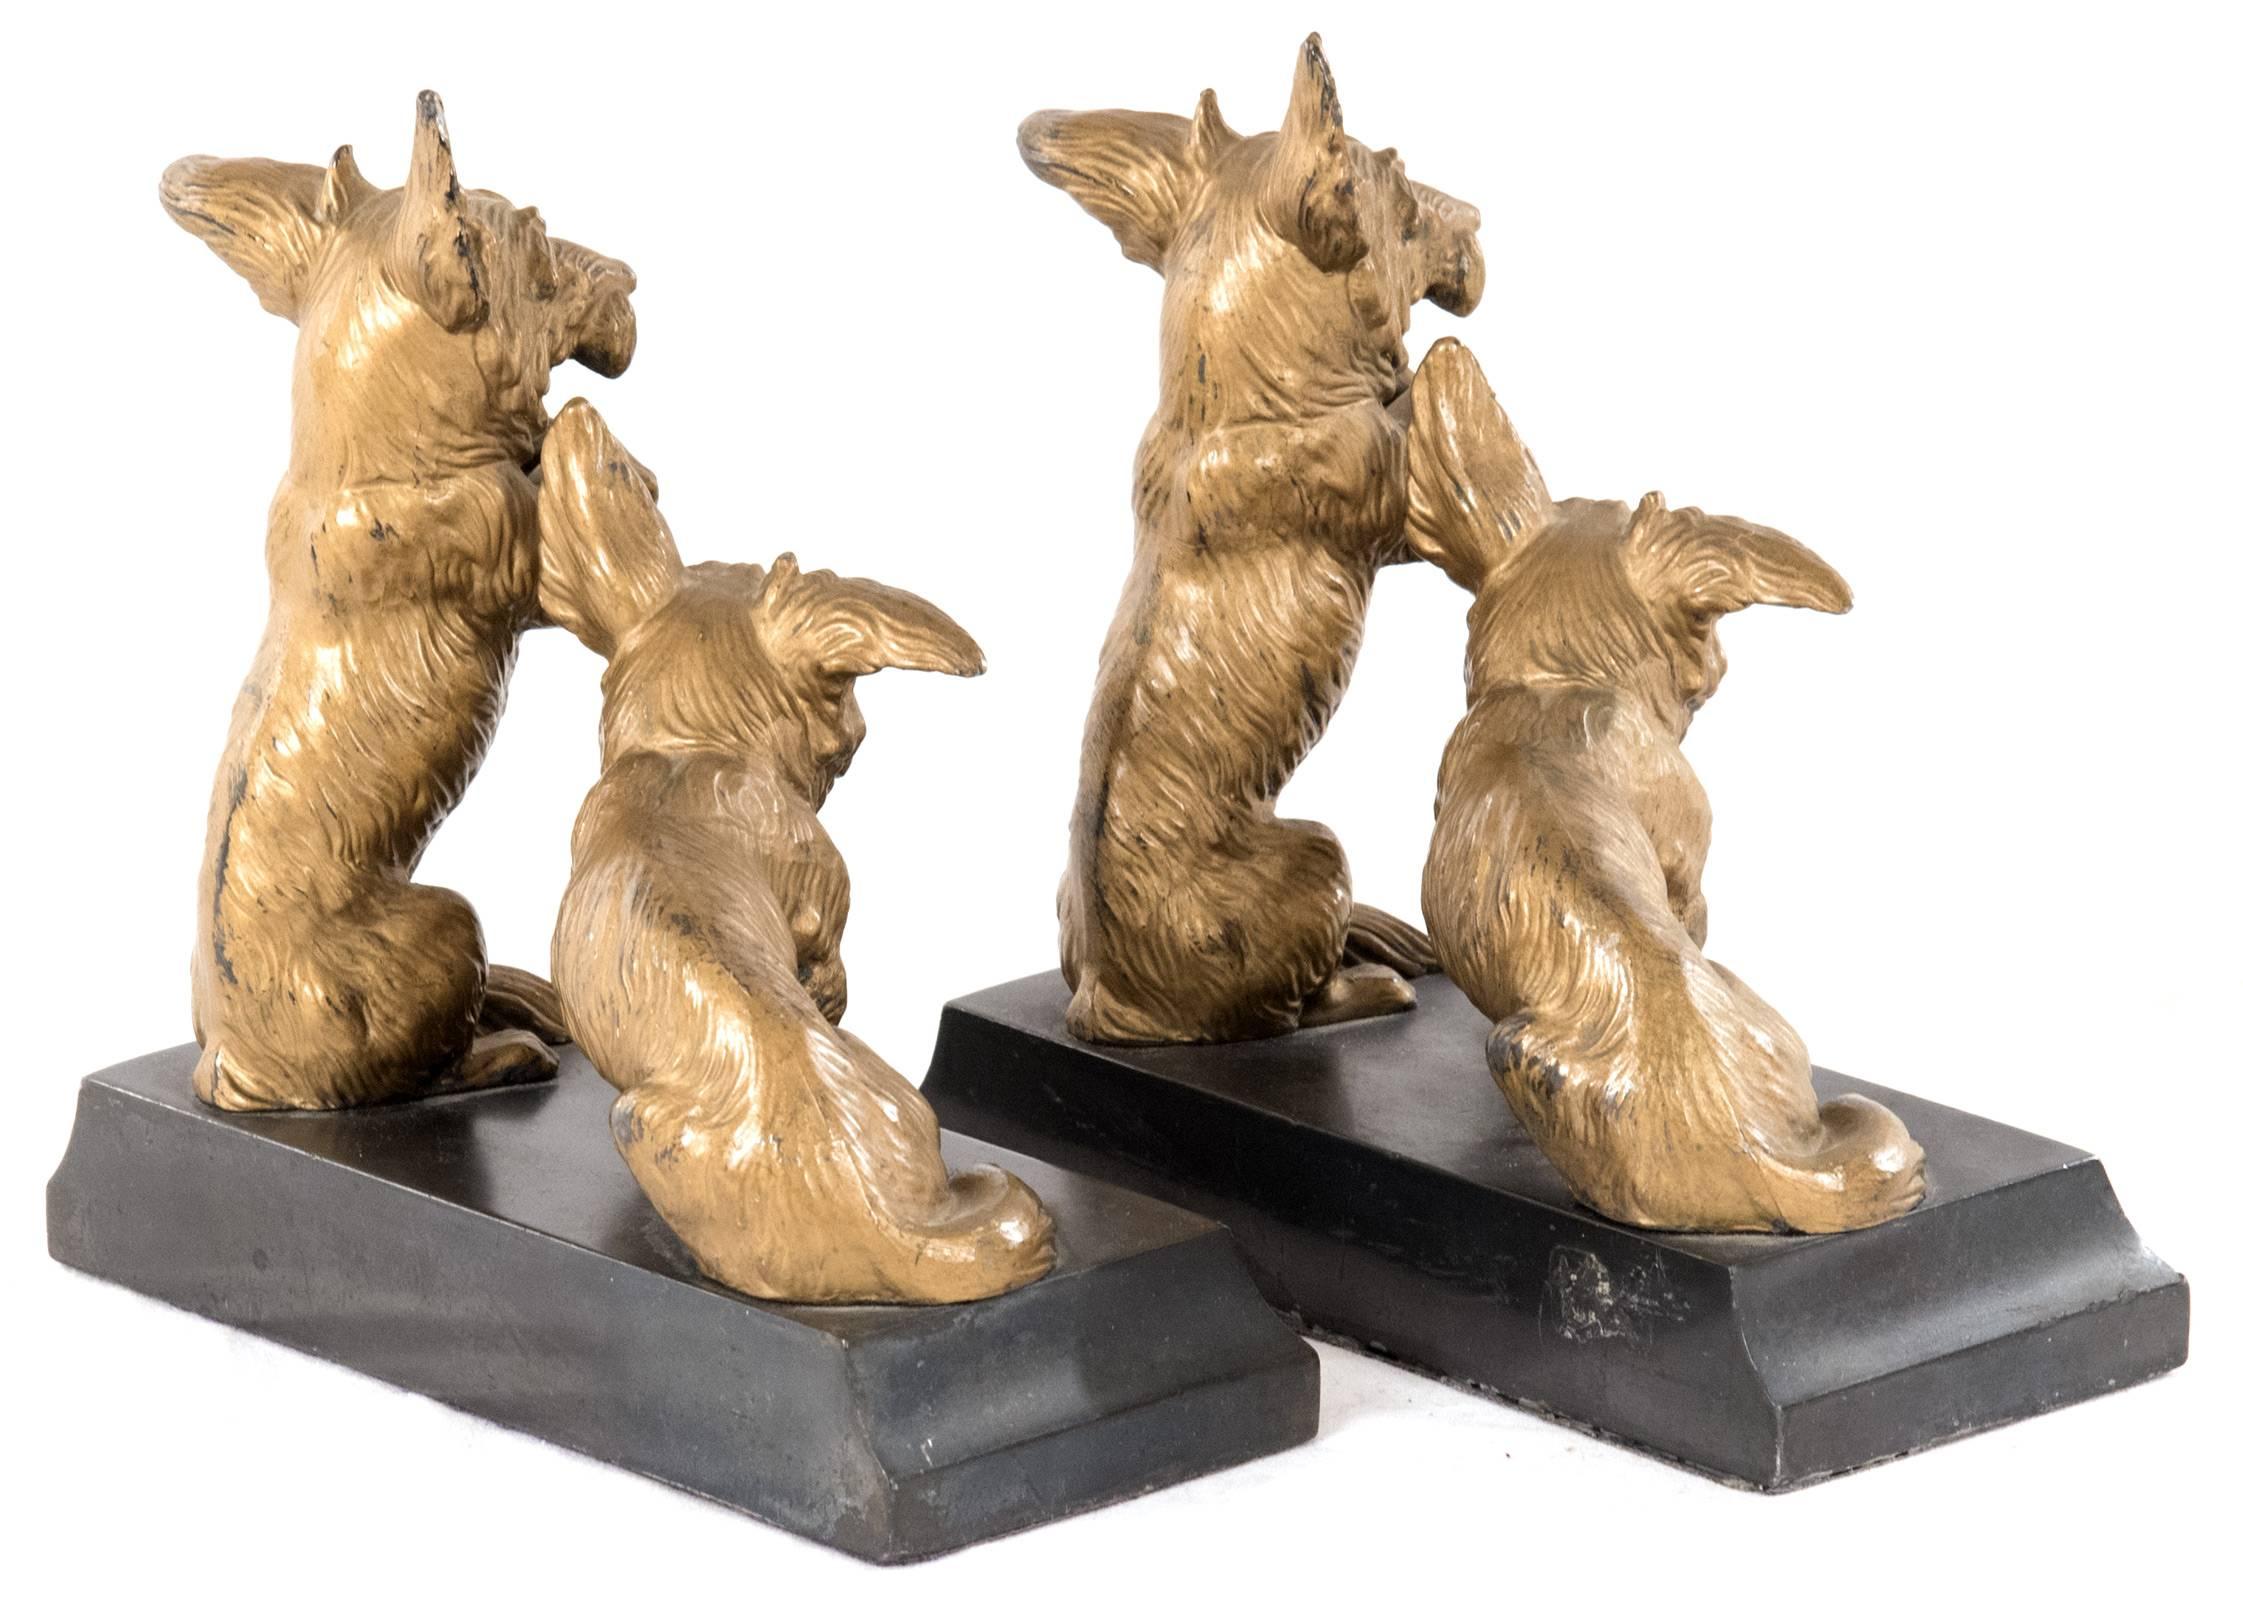 A set of bookends, mirroring each other, with a pair of Welsh Corgi dogs mounted on a black marble base, one sitting and the other raised on its hind legs, begging.